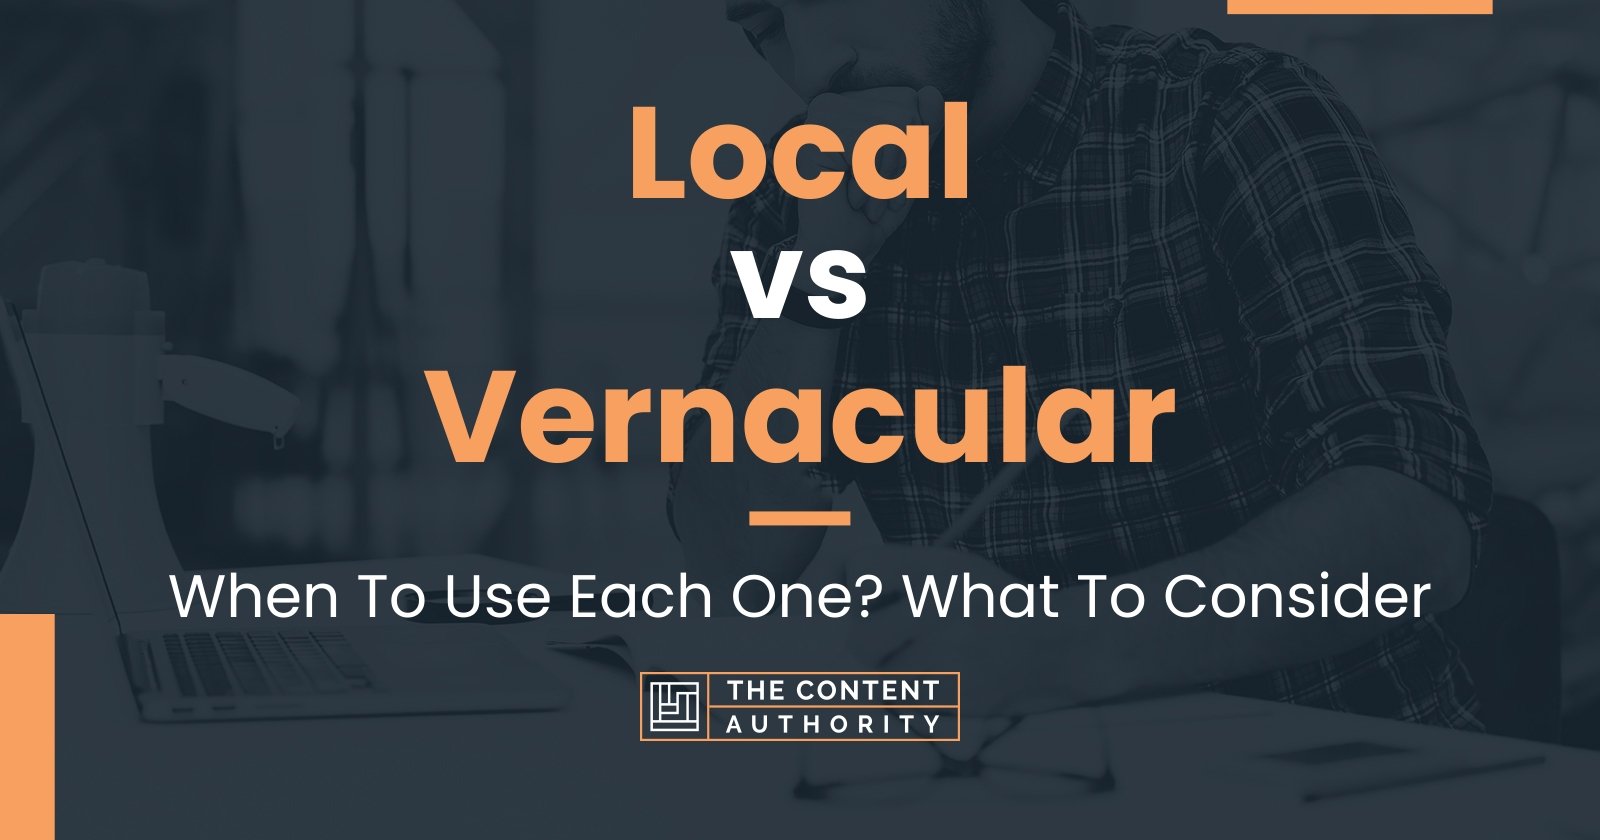 Local vs Vernacular: When To Use Each One? What To Consider